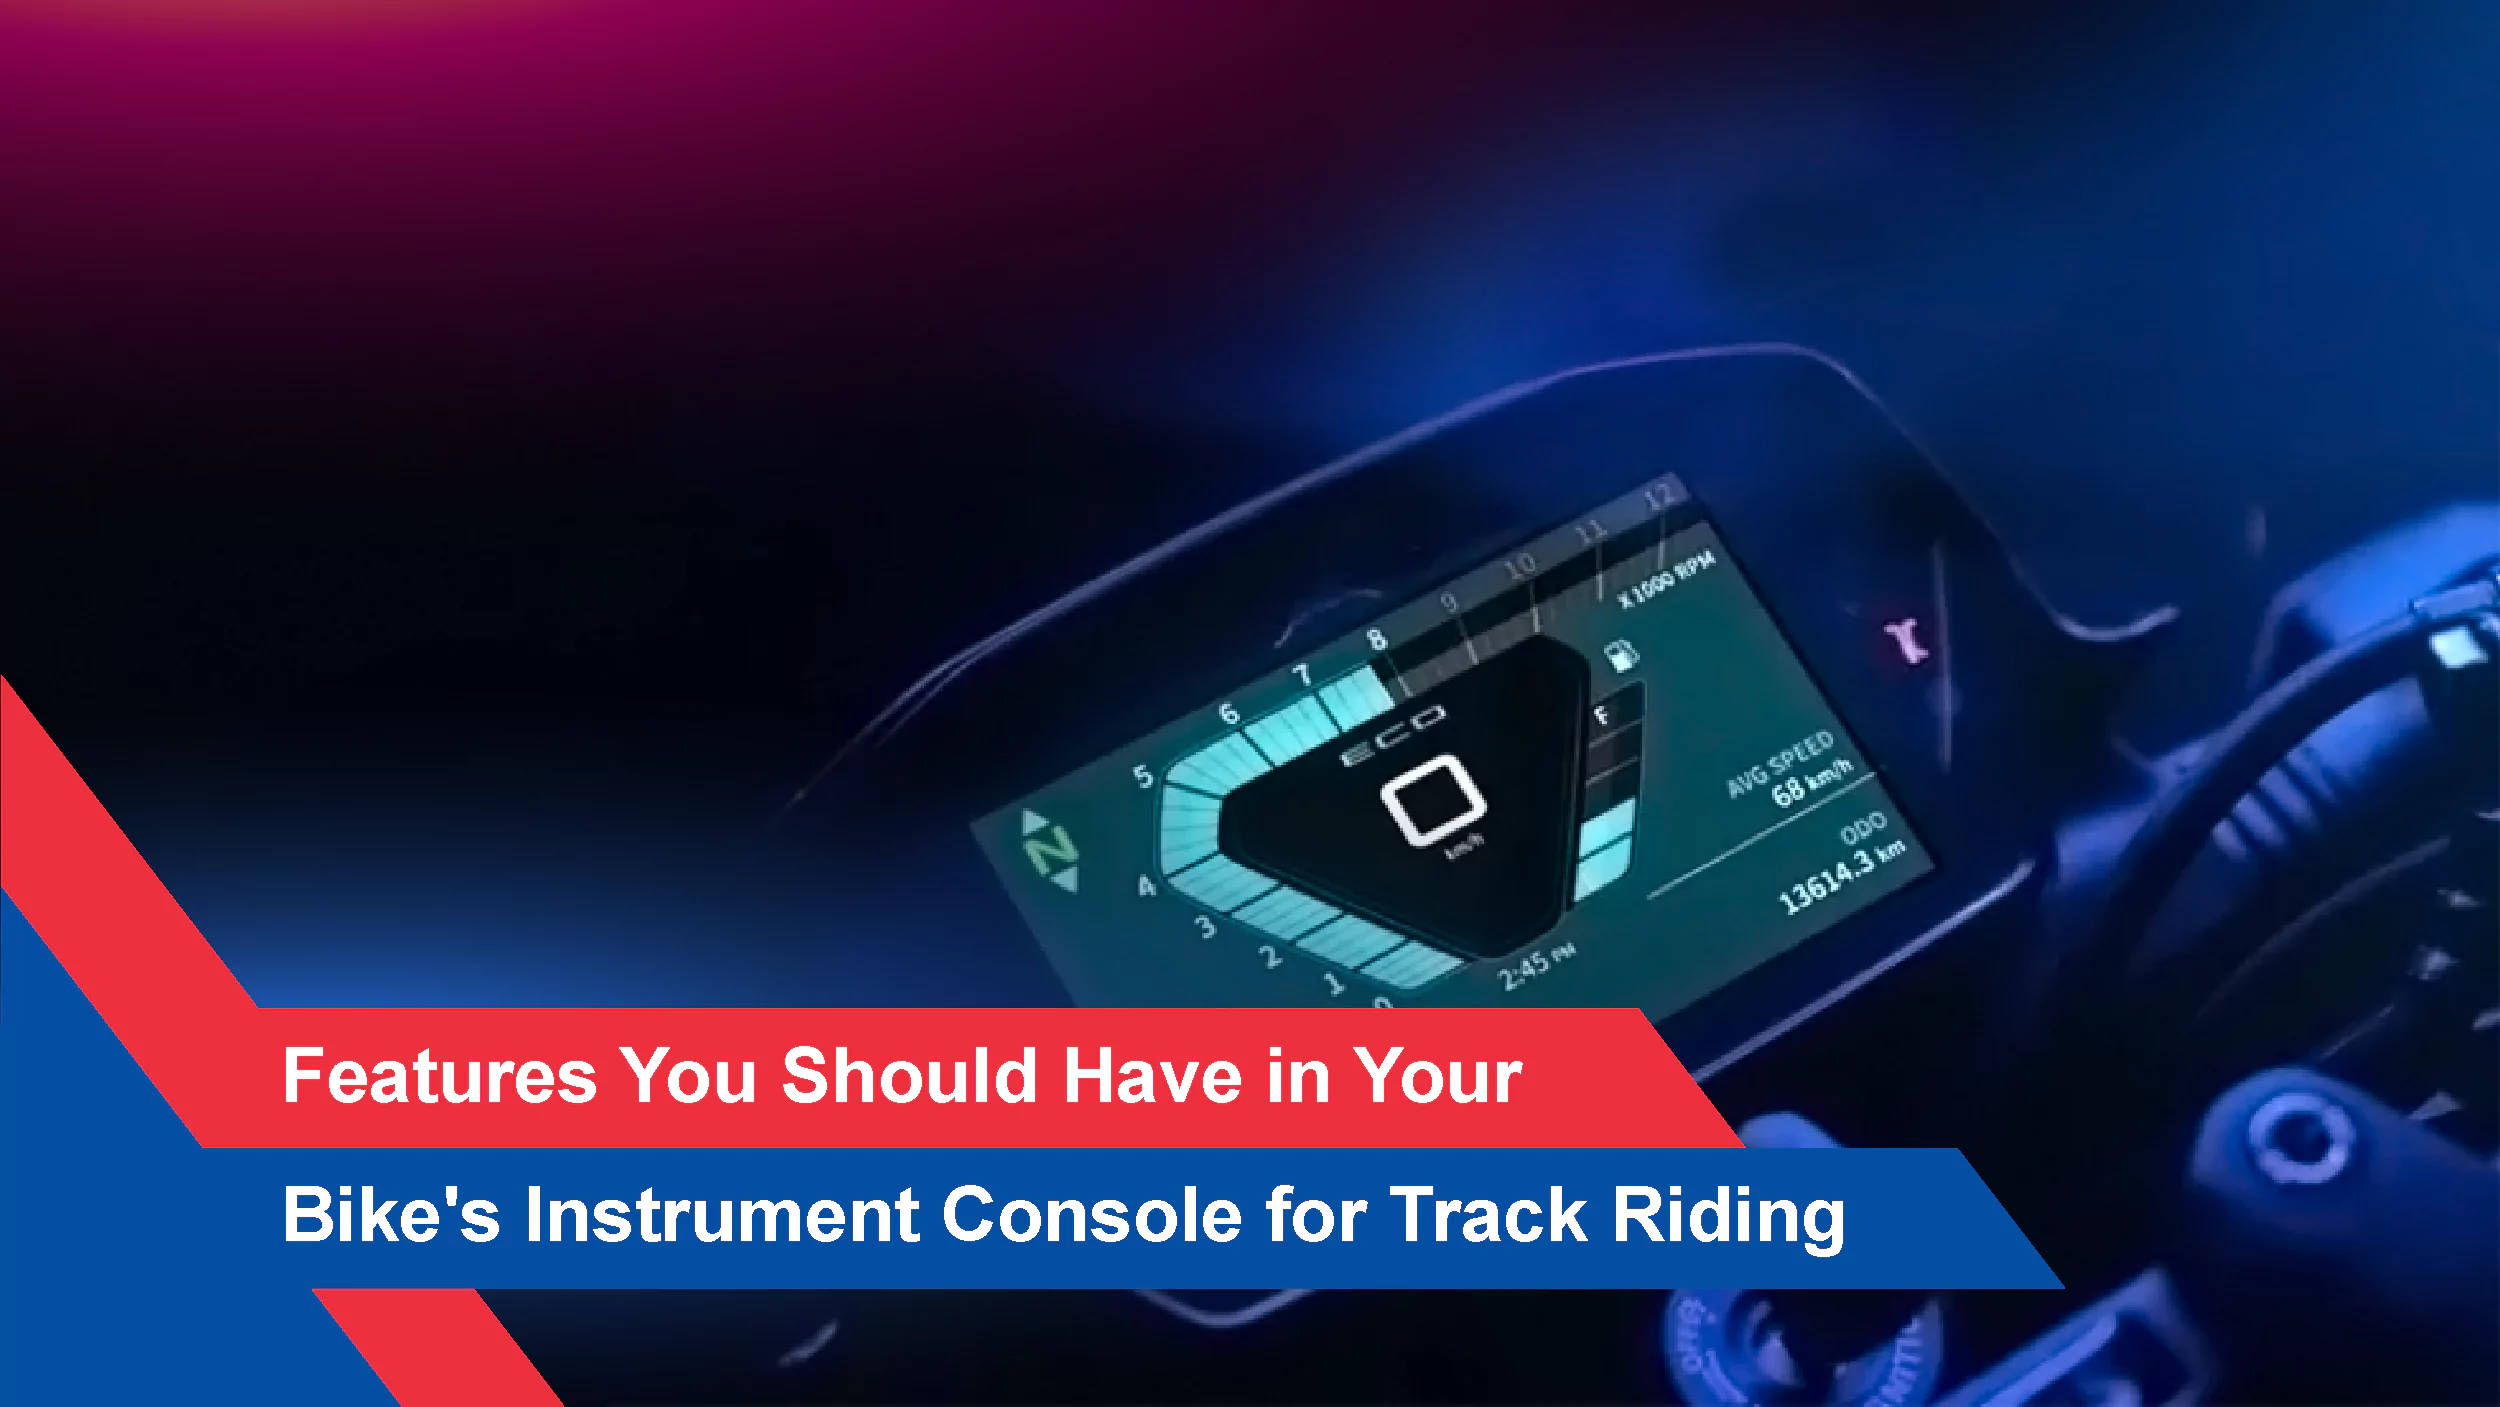 Features You Should Have in Your Bike's Instrument Console for Track Riding